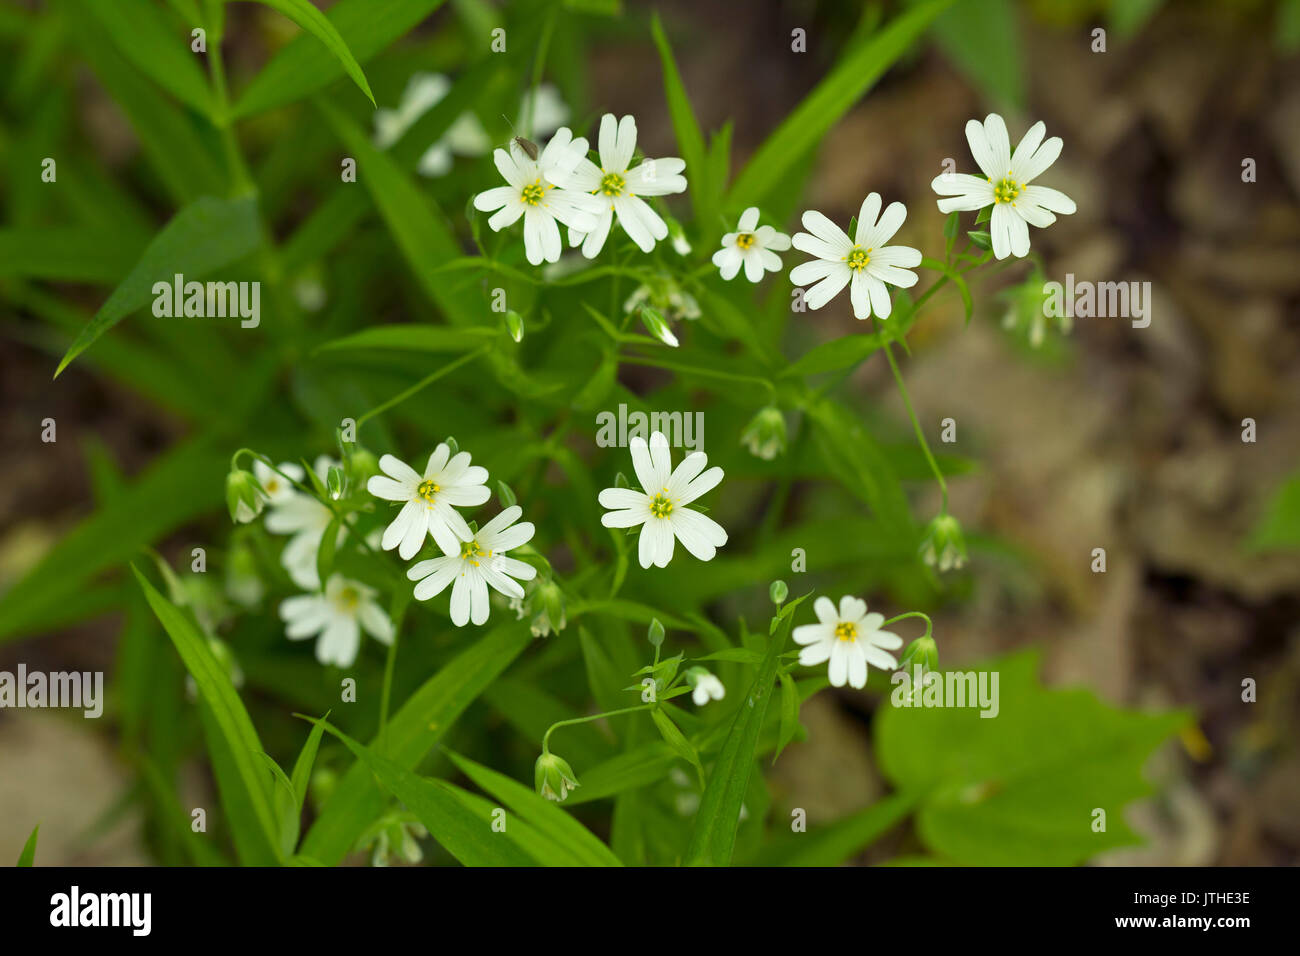 A field of stellaria media flowers in the forest Stock Photo